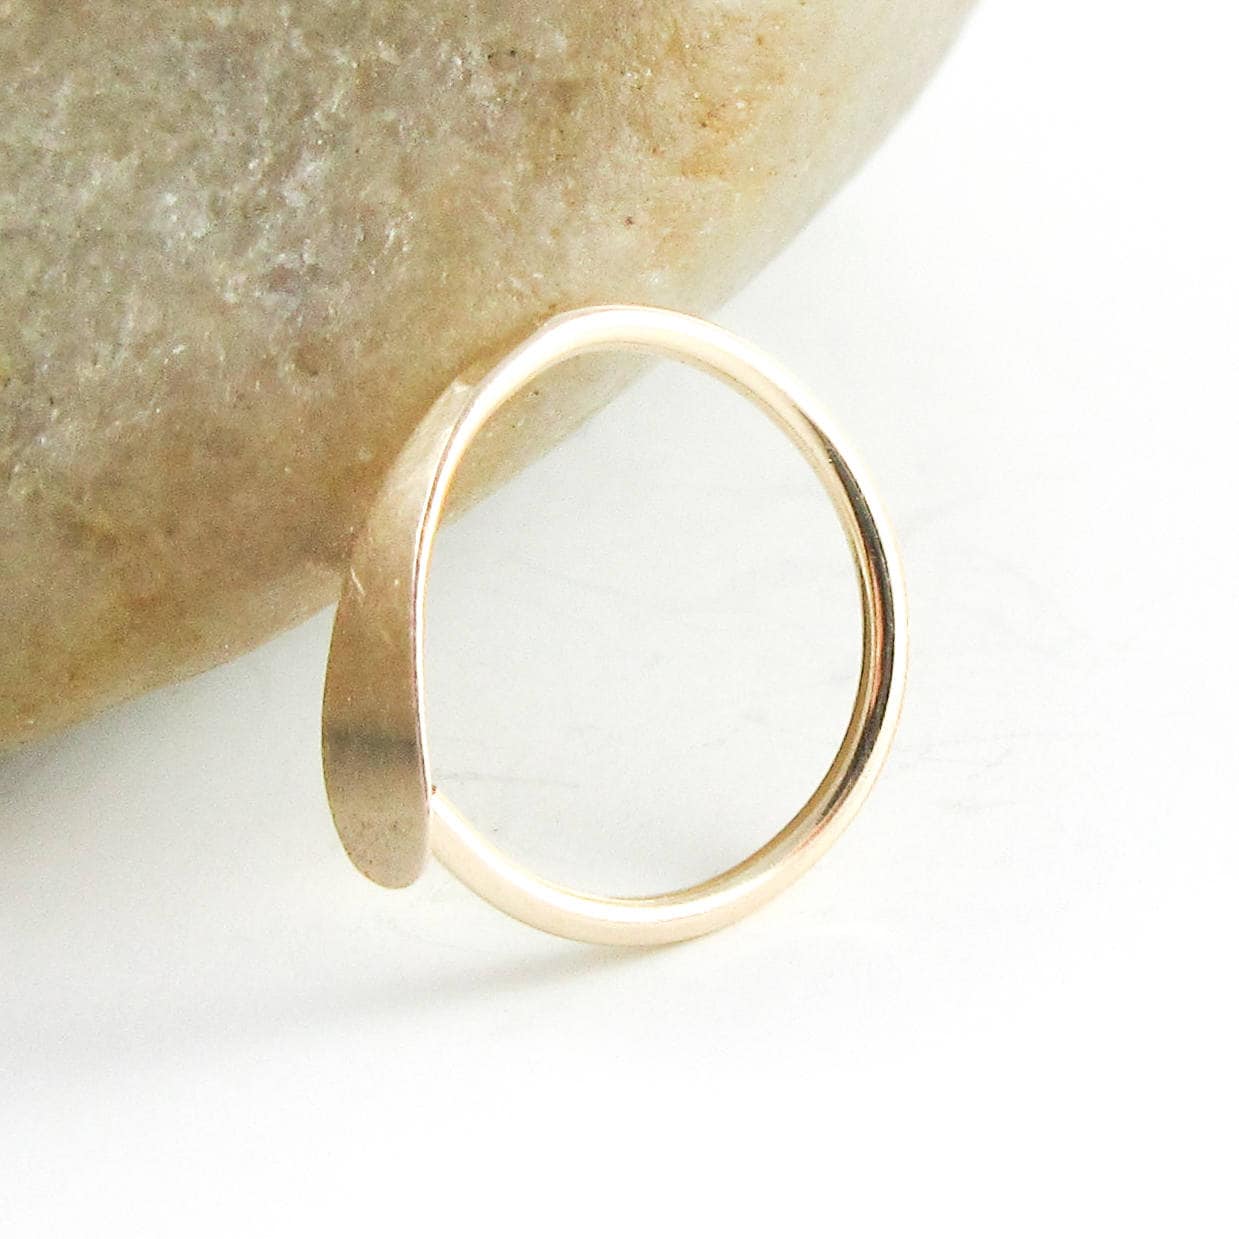 Gold Hoop Pierced Conch Earring Cartilage Earring,14K Gold Filled,Gauge Post Conch Piercing,Tragus Helix Piercing Ring,Hammered ELDGFHMPOST